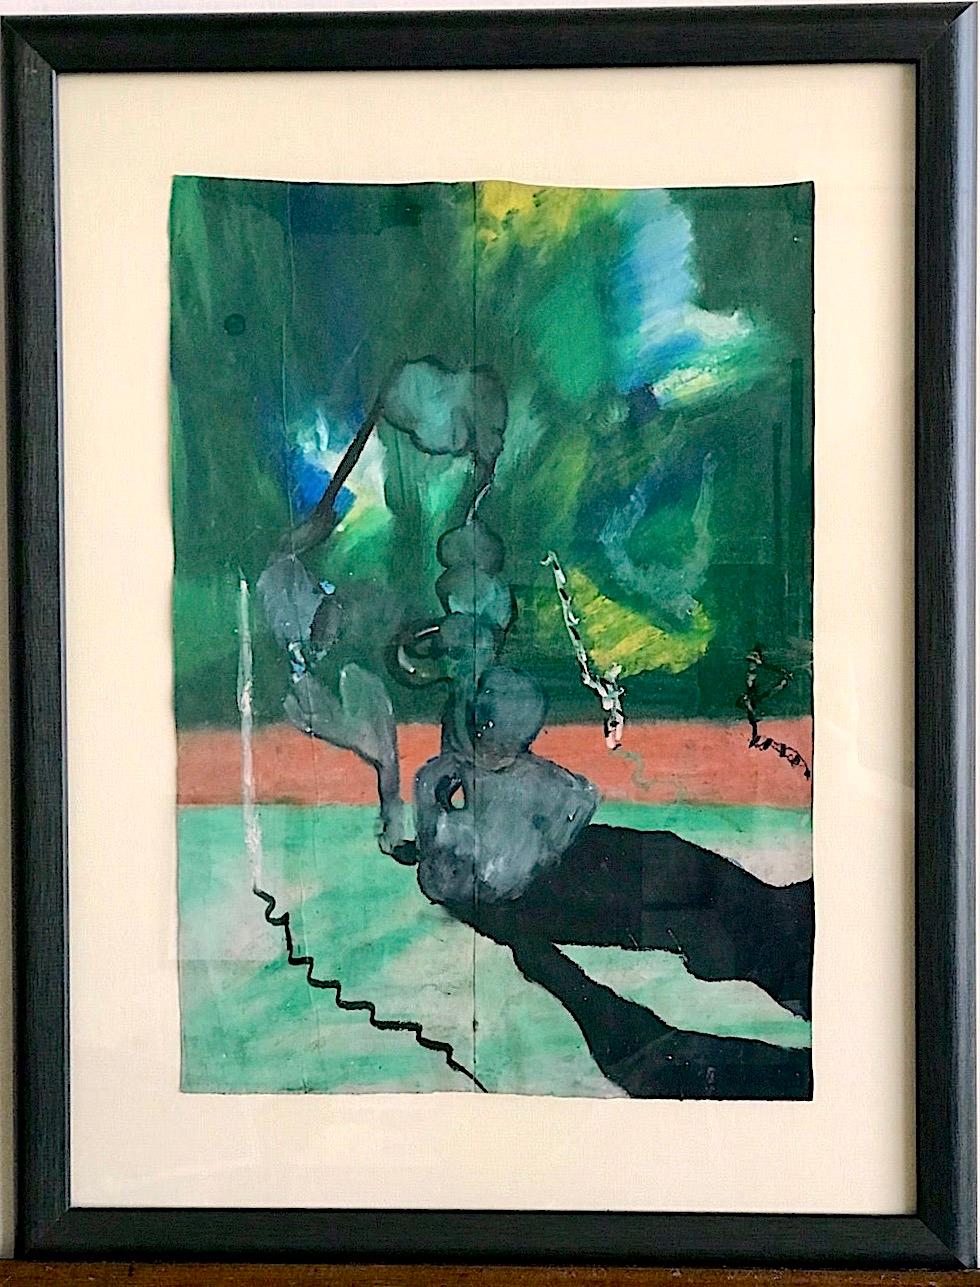 CURIOUS PHENOMENA Signed Oil Pastel, Abstract Landscape, Gray Green Yellow Coral - Neo-Expressionist Art by Reginald K. Gee